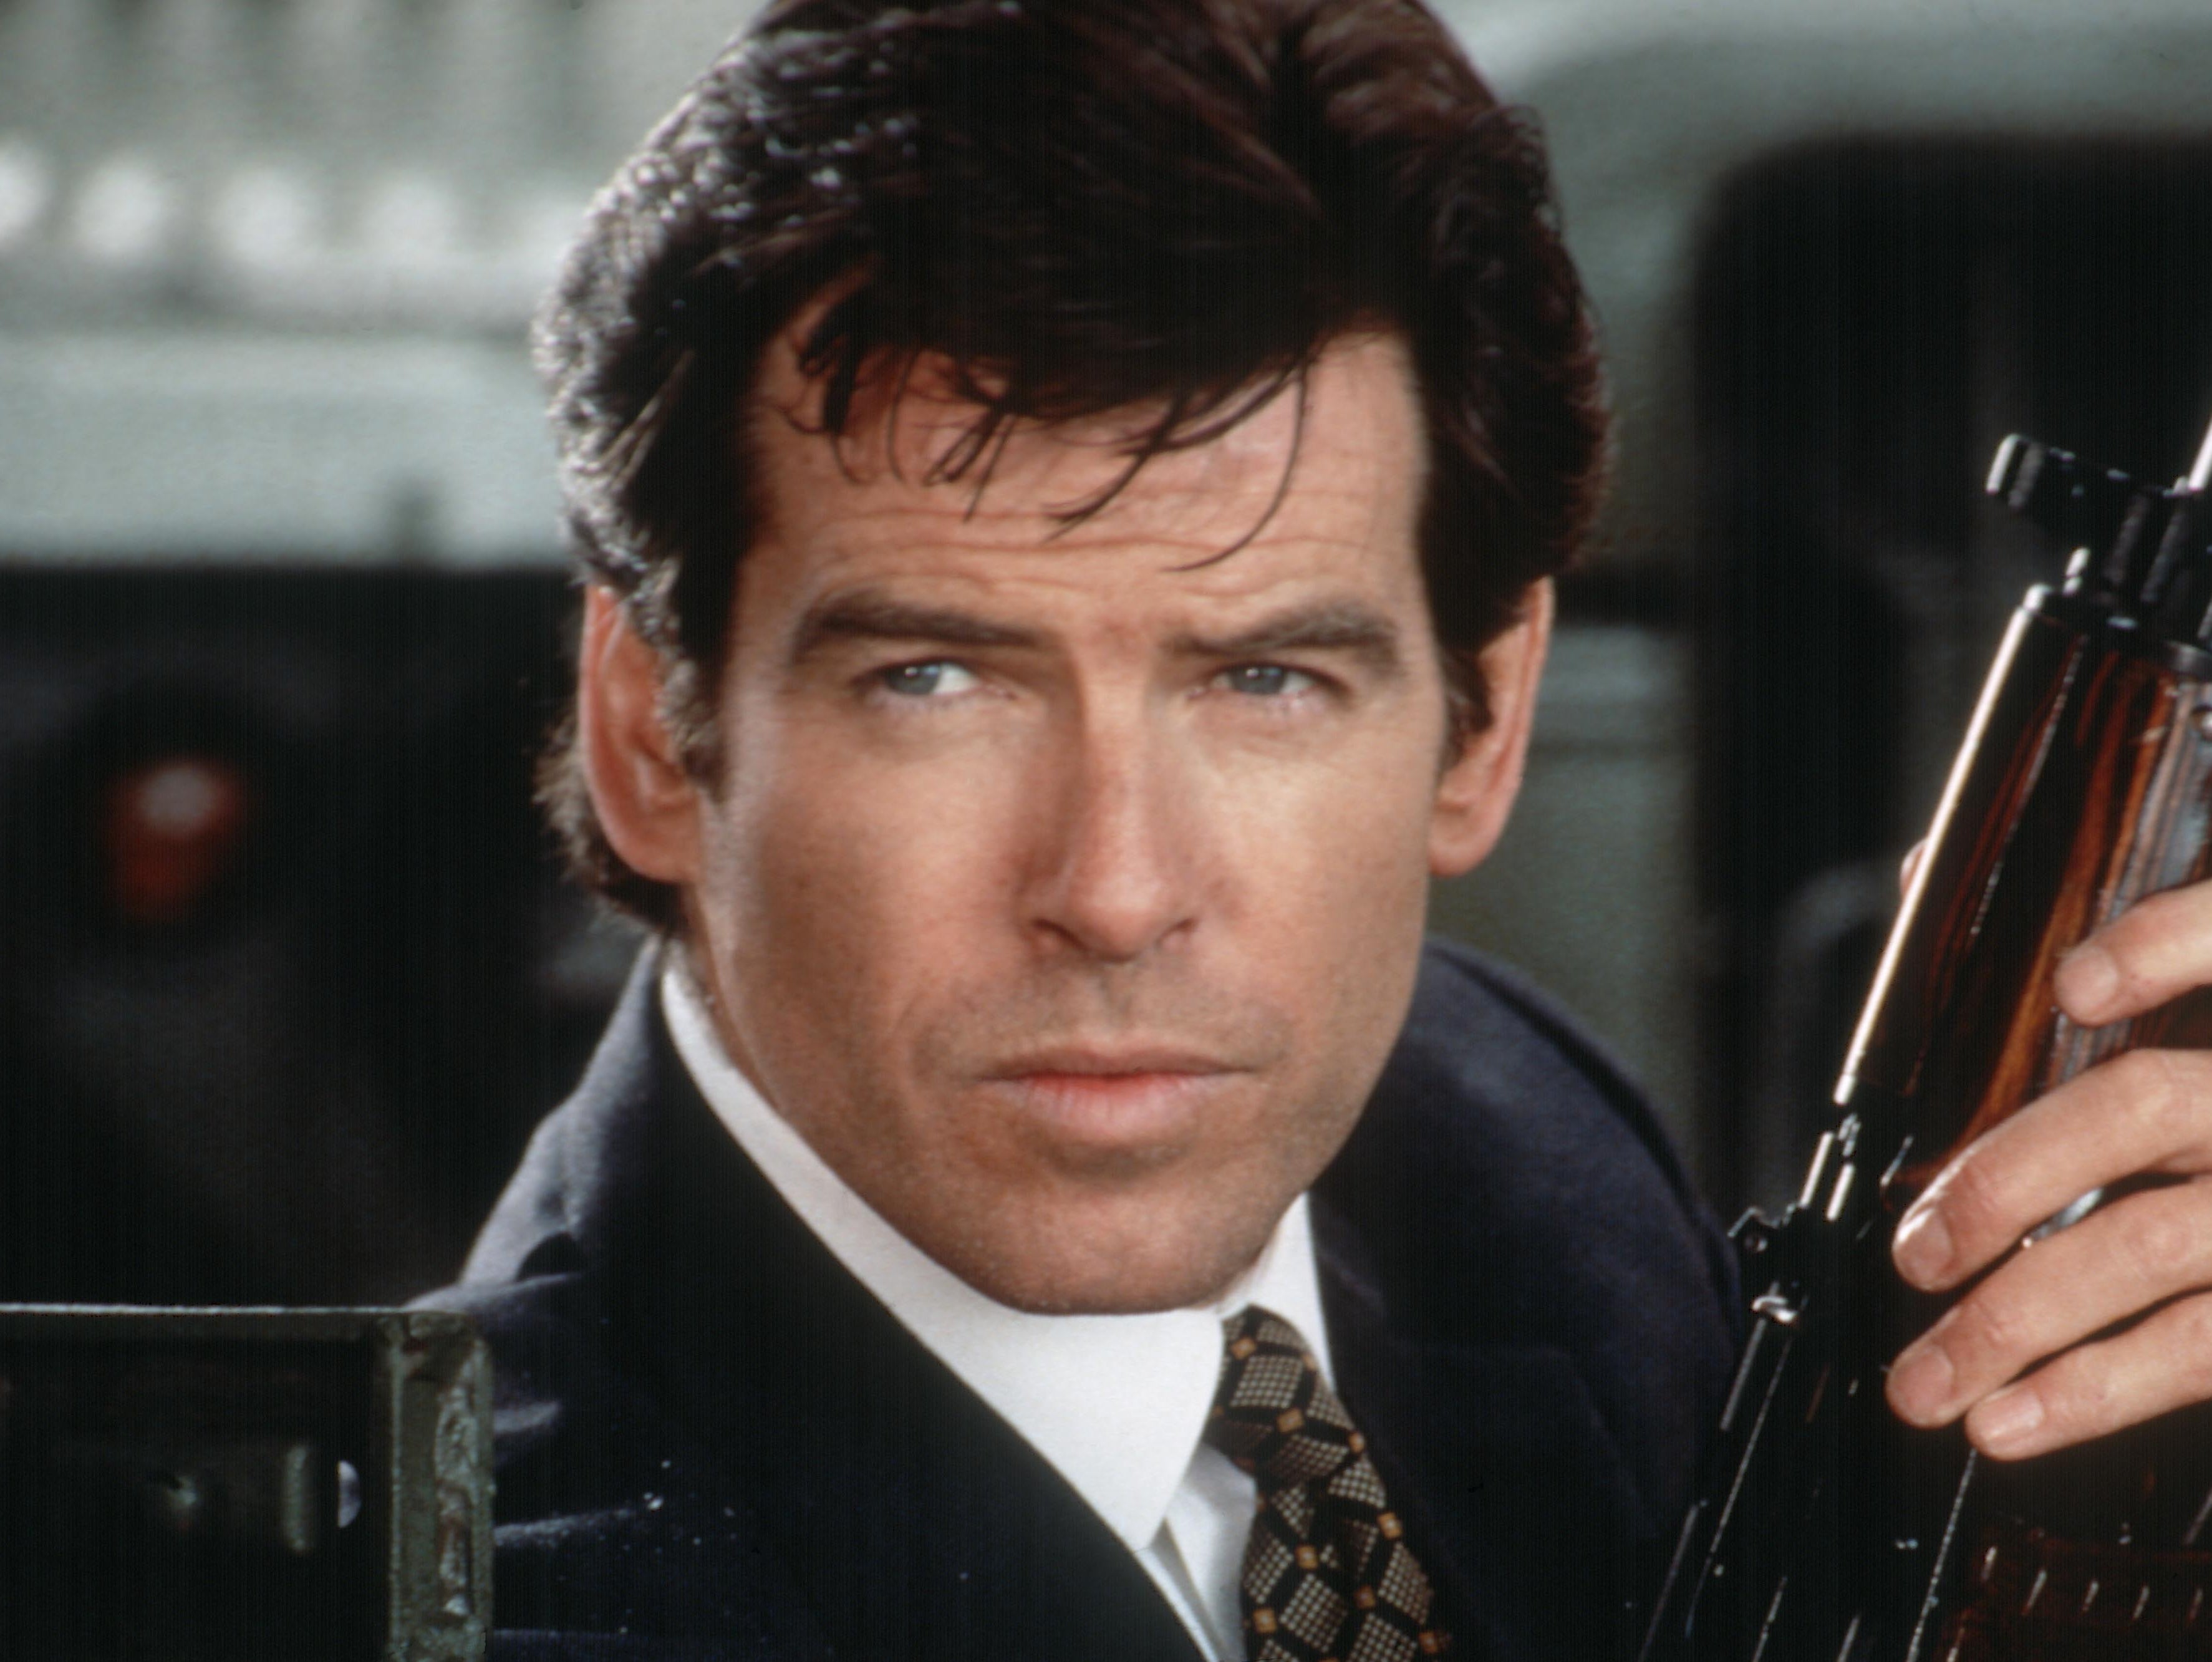 Nintendo wanted to tone down the violence in 'GoldenEye